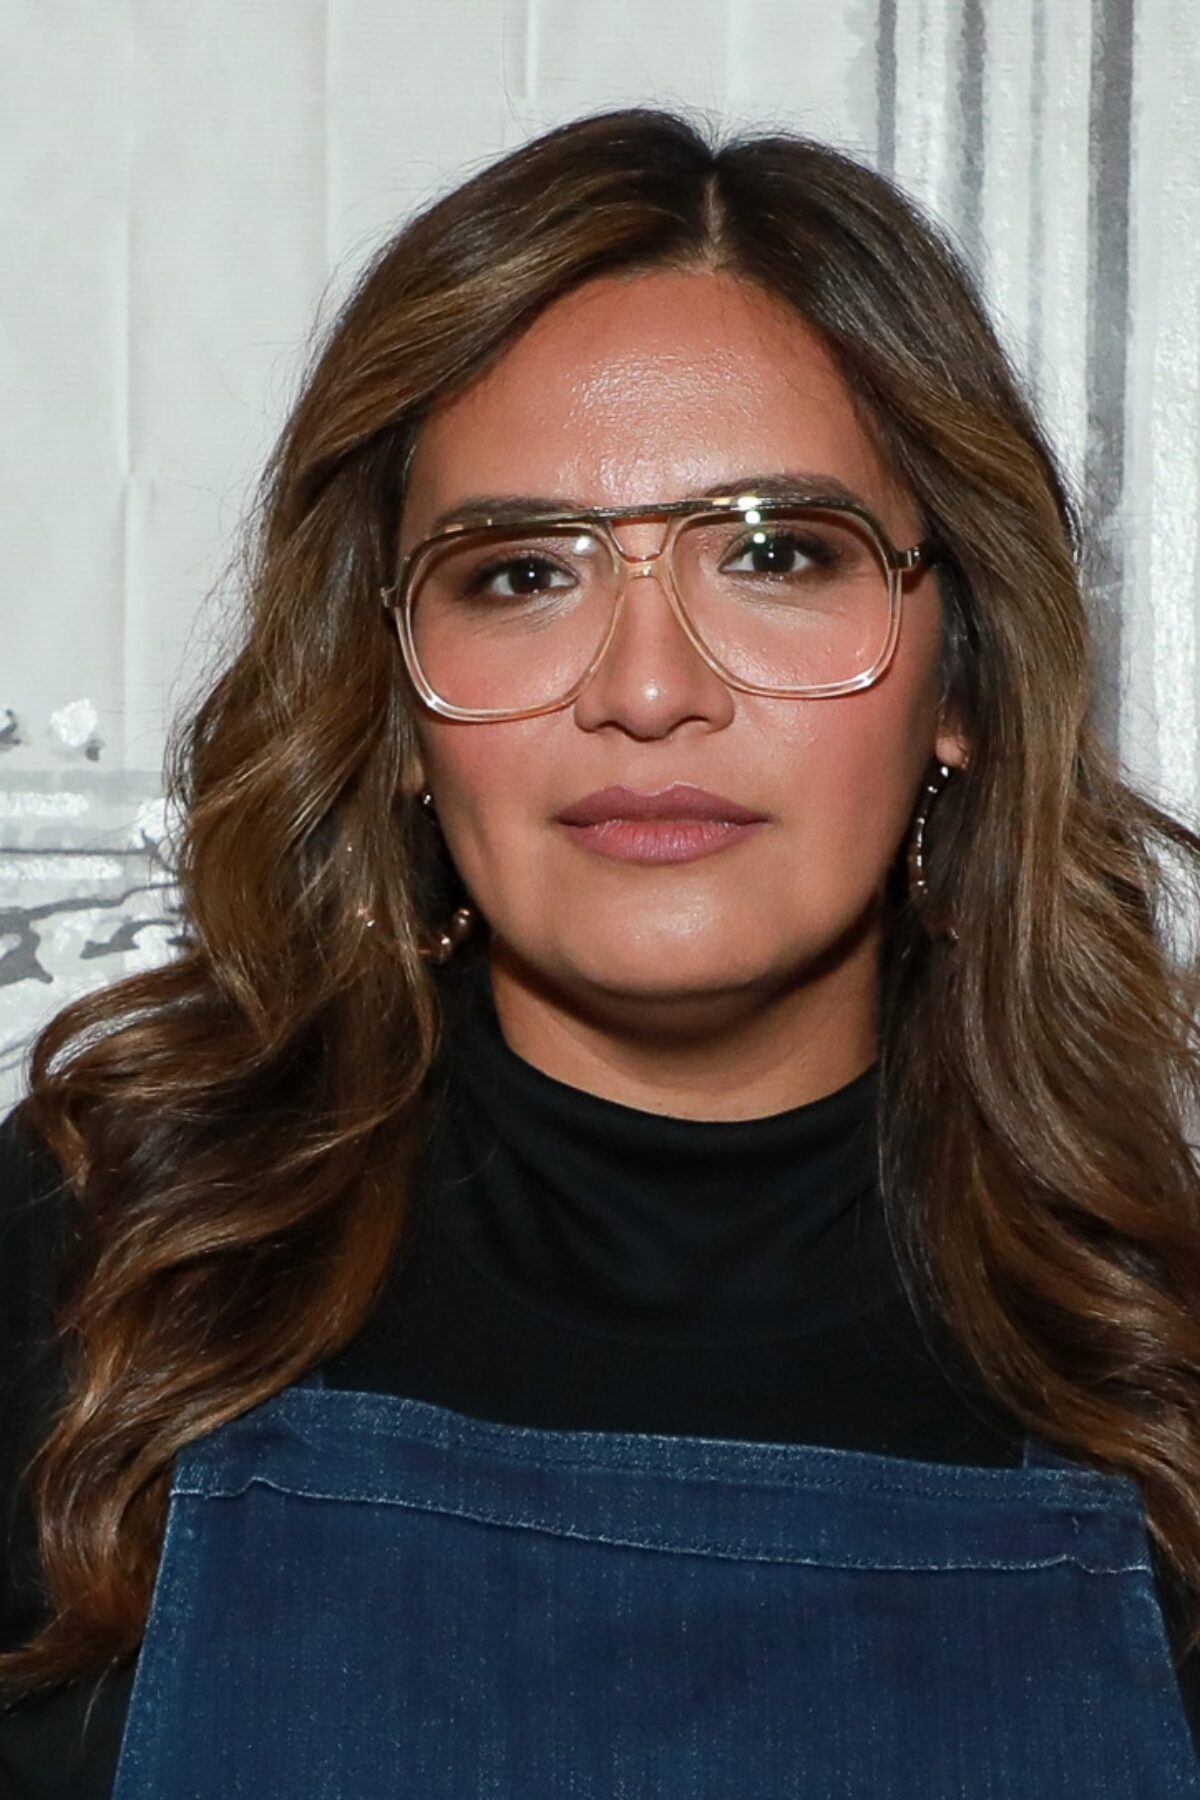 NEW YORK, NY - OCTOBER 07: Cristela Alonzo at Build Studio on October 7, 2019 in New York City. (Photo by Jason Mendez/Getty Images)